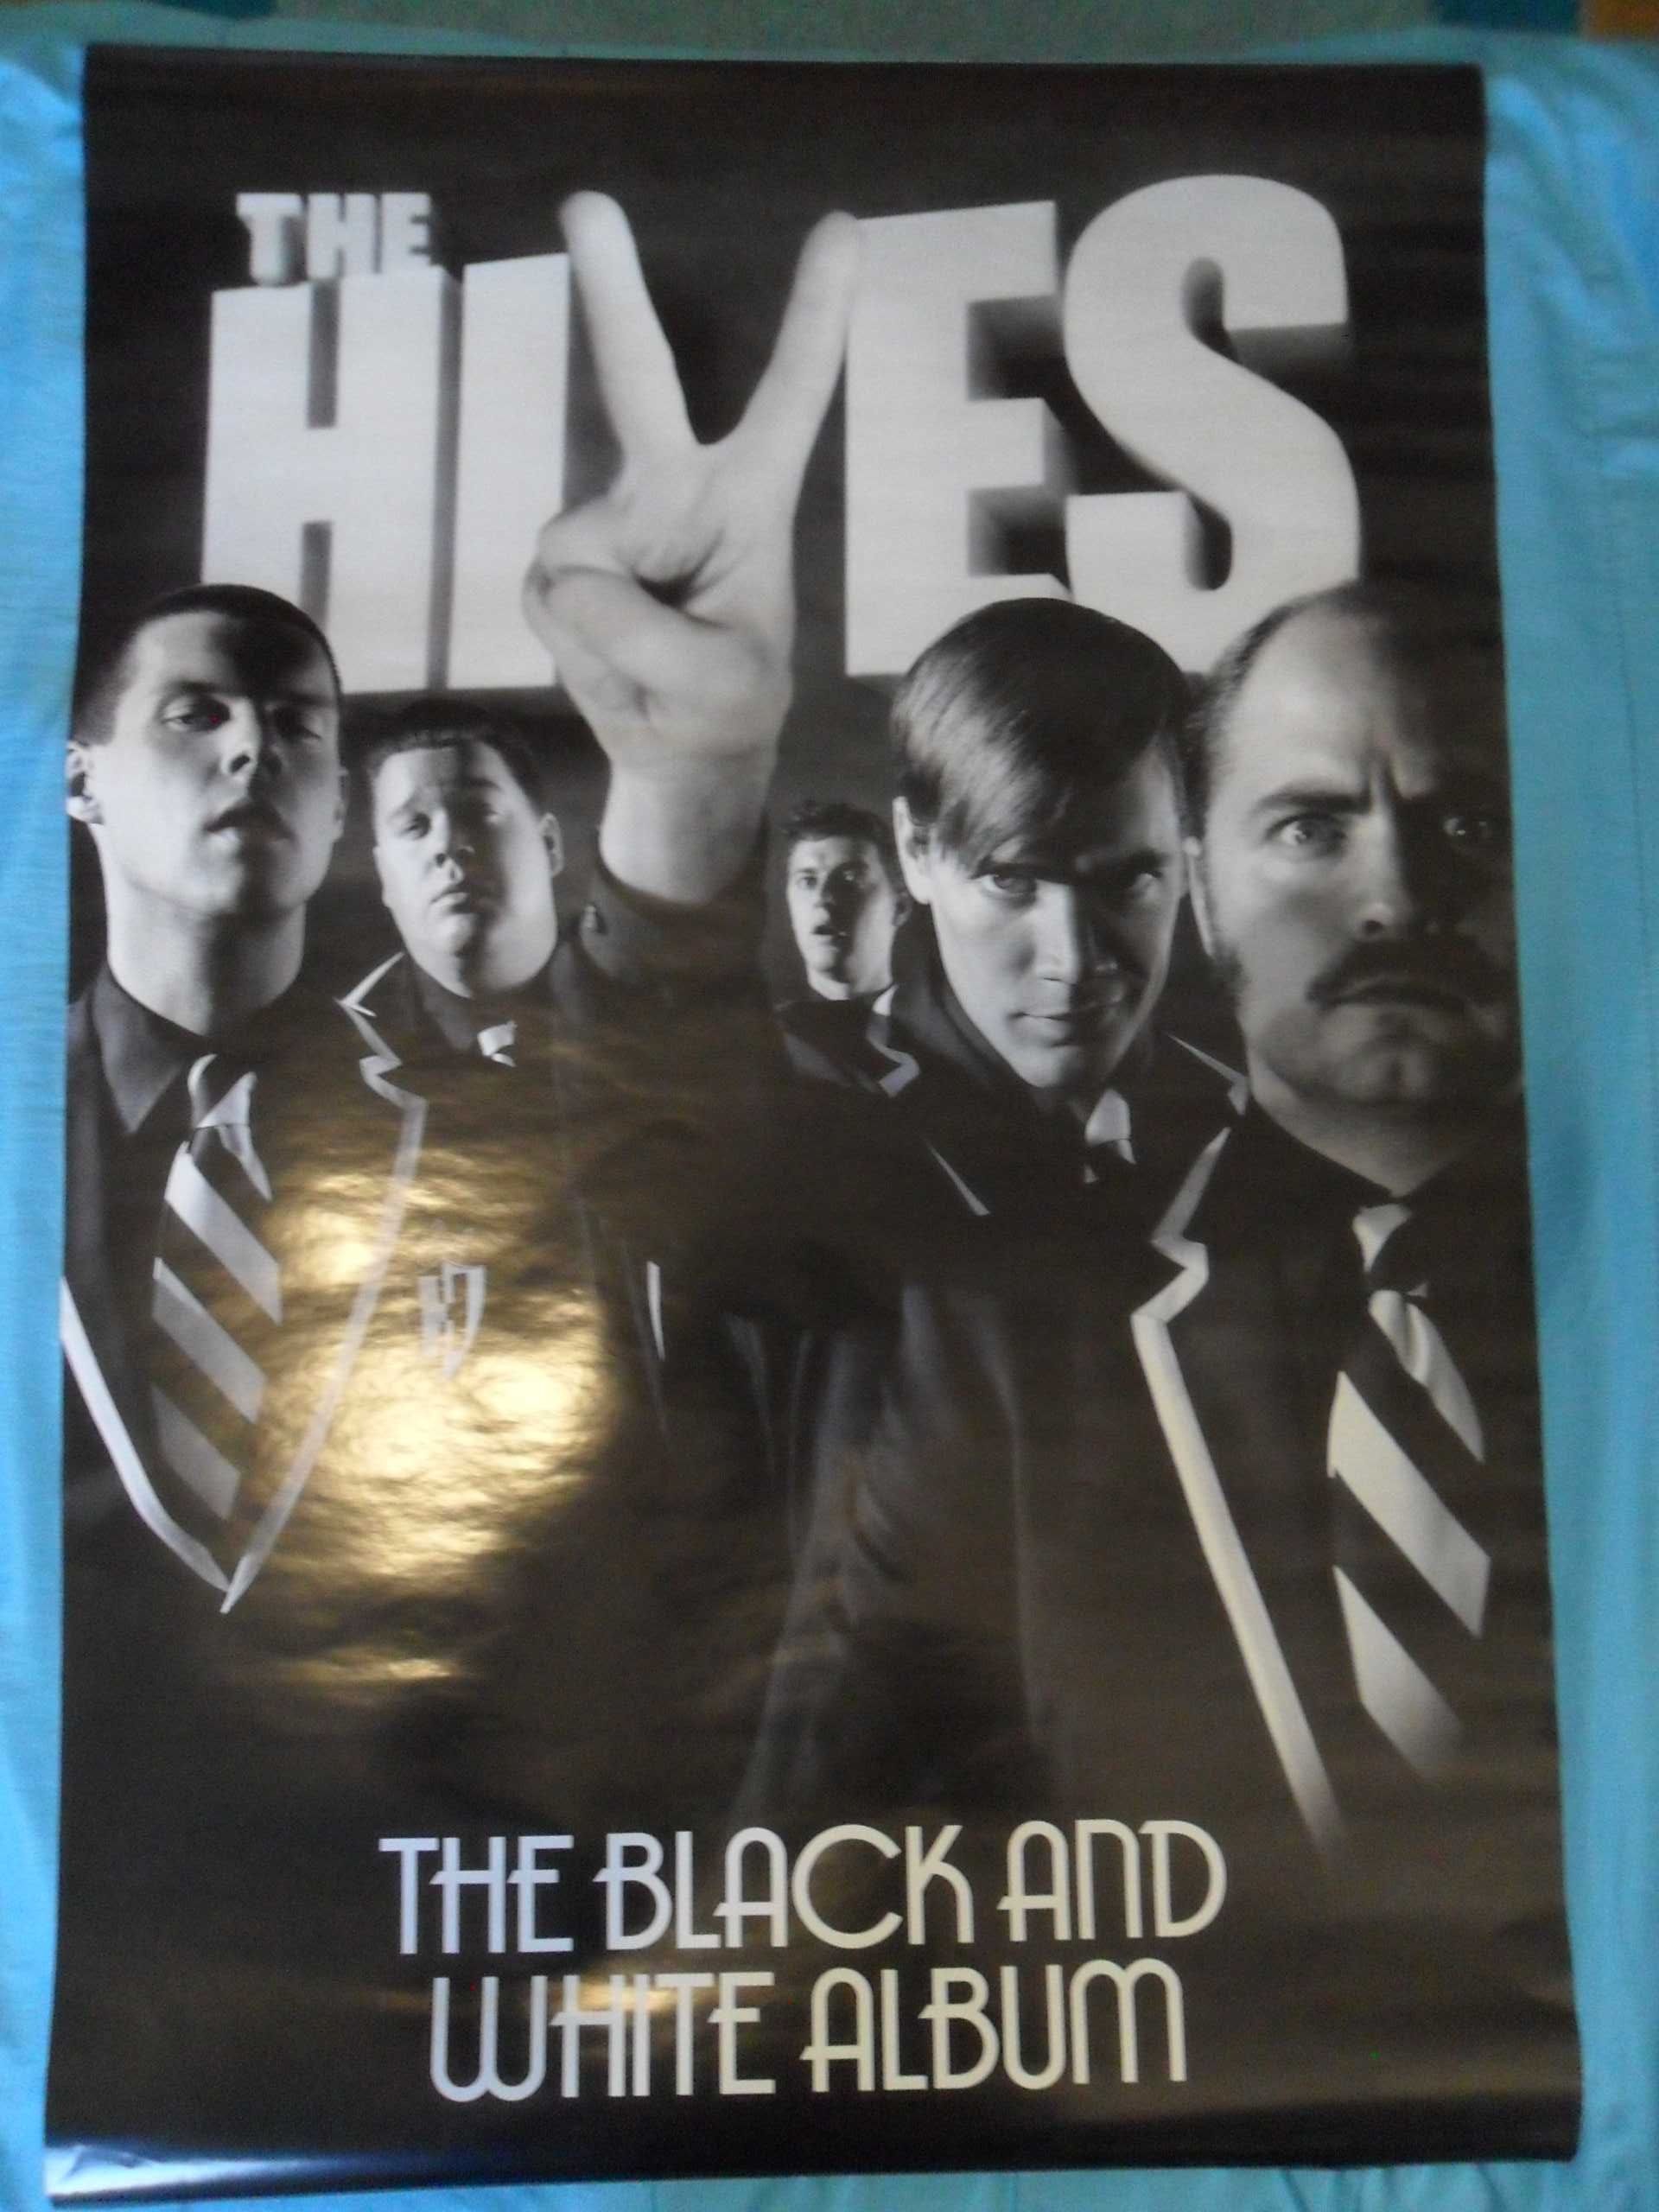 Poster The Hives the black and white album